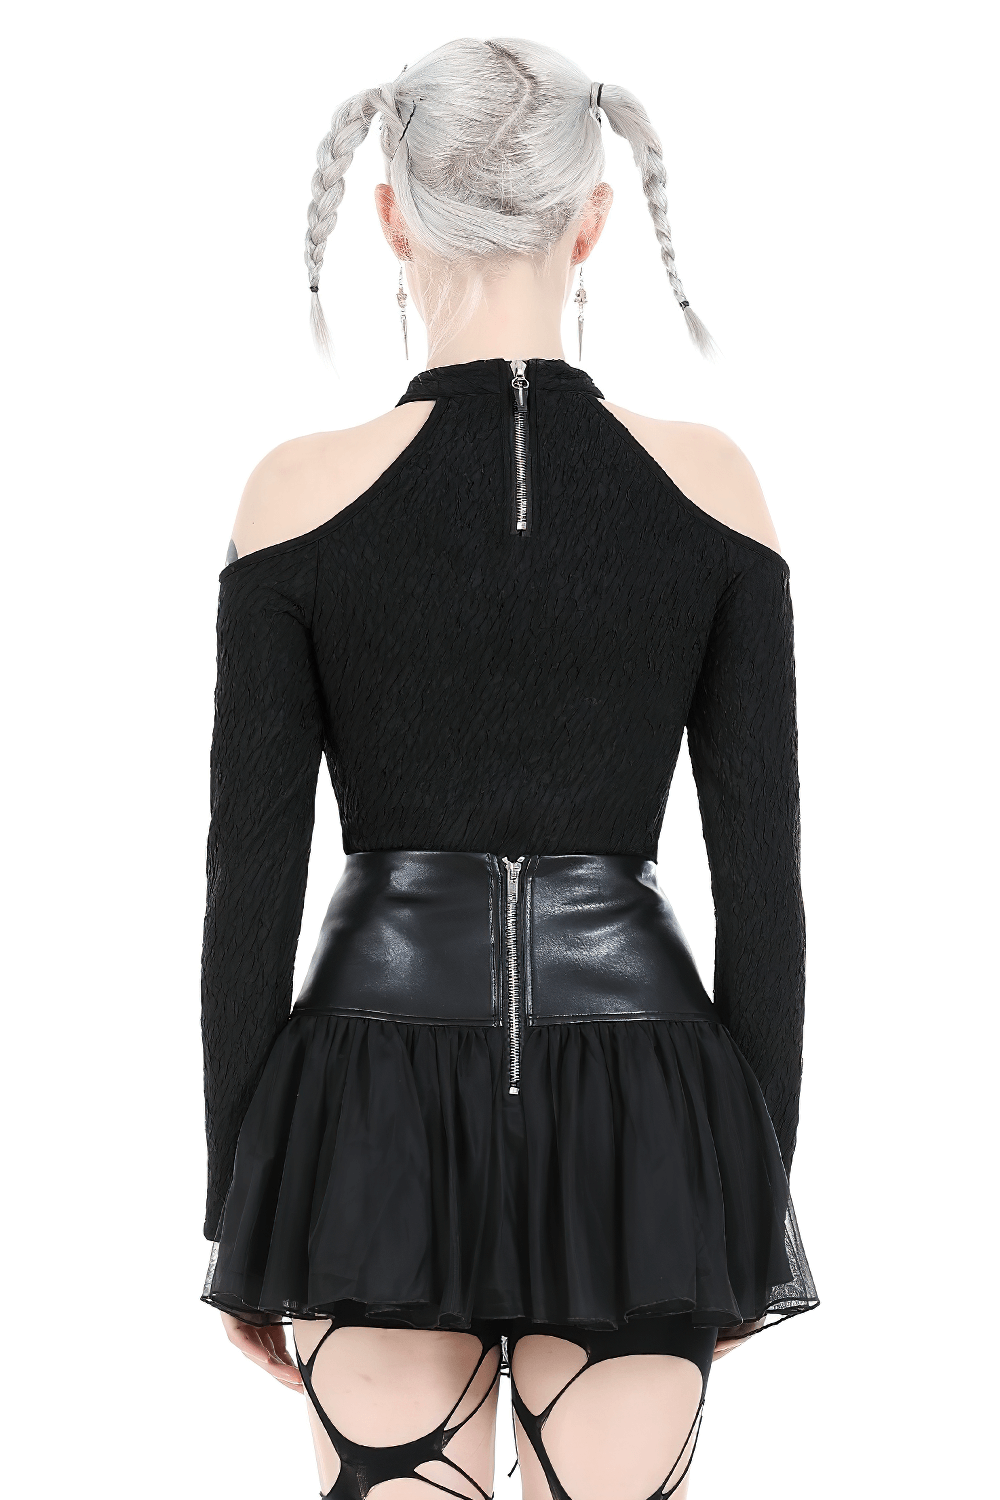 Gothic Black Cold Shoulder Top with Metal Accents